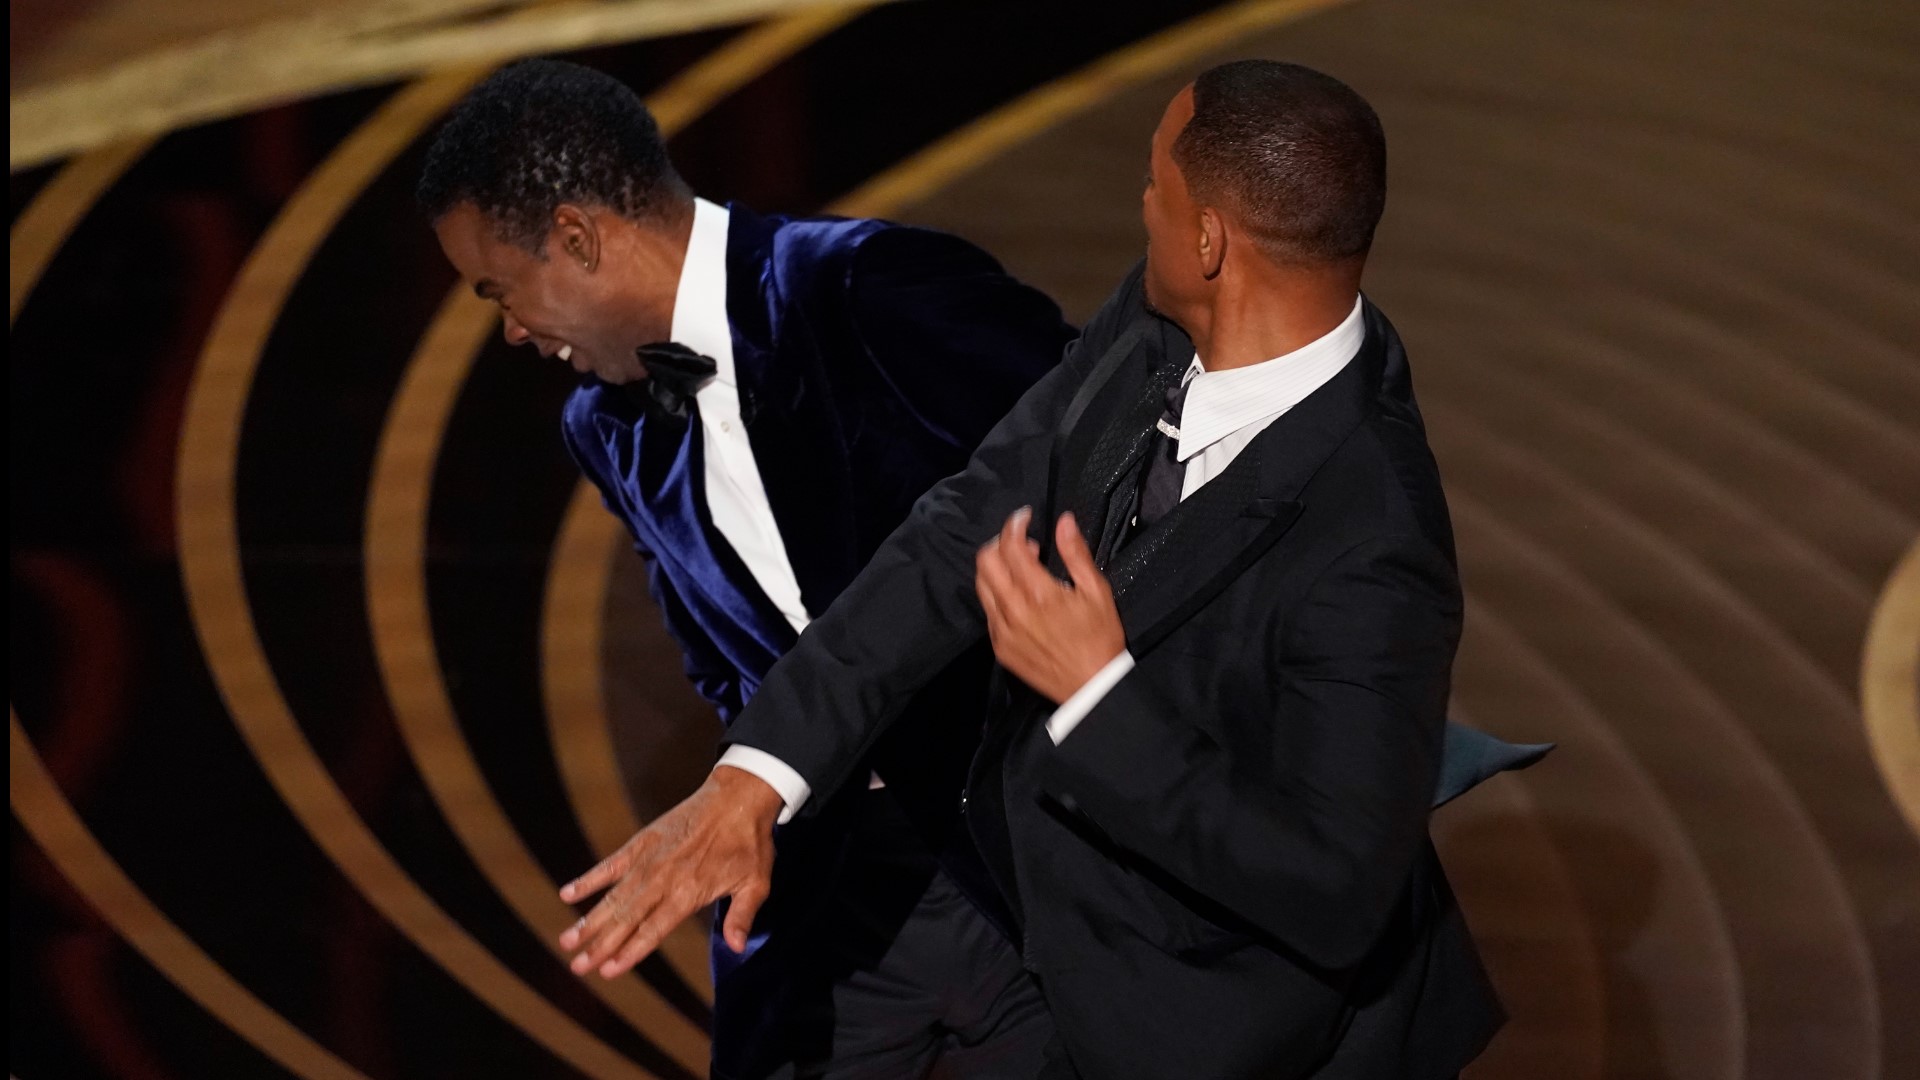 Although he apologized for his behavior while accepting his best actor award, Smith had not yet issued an apology directly to Rock after slapping him at the Oscars.